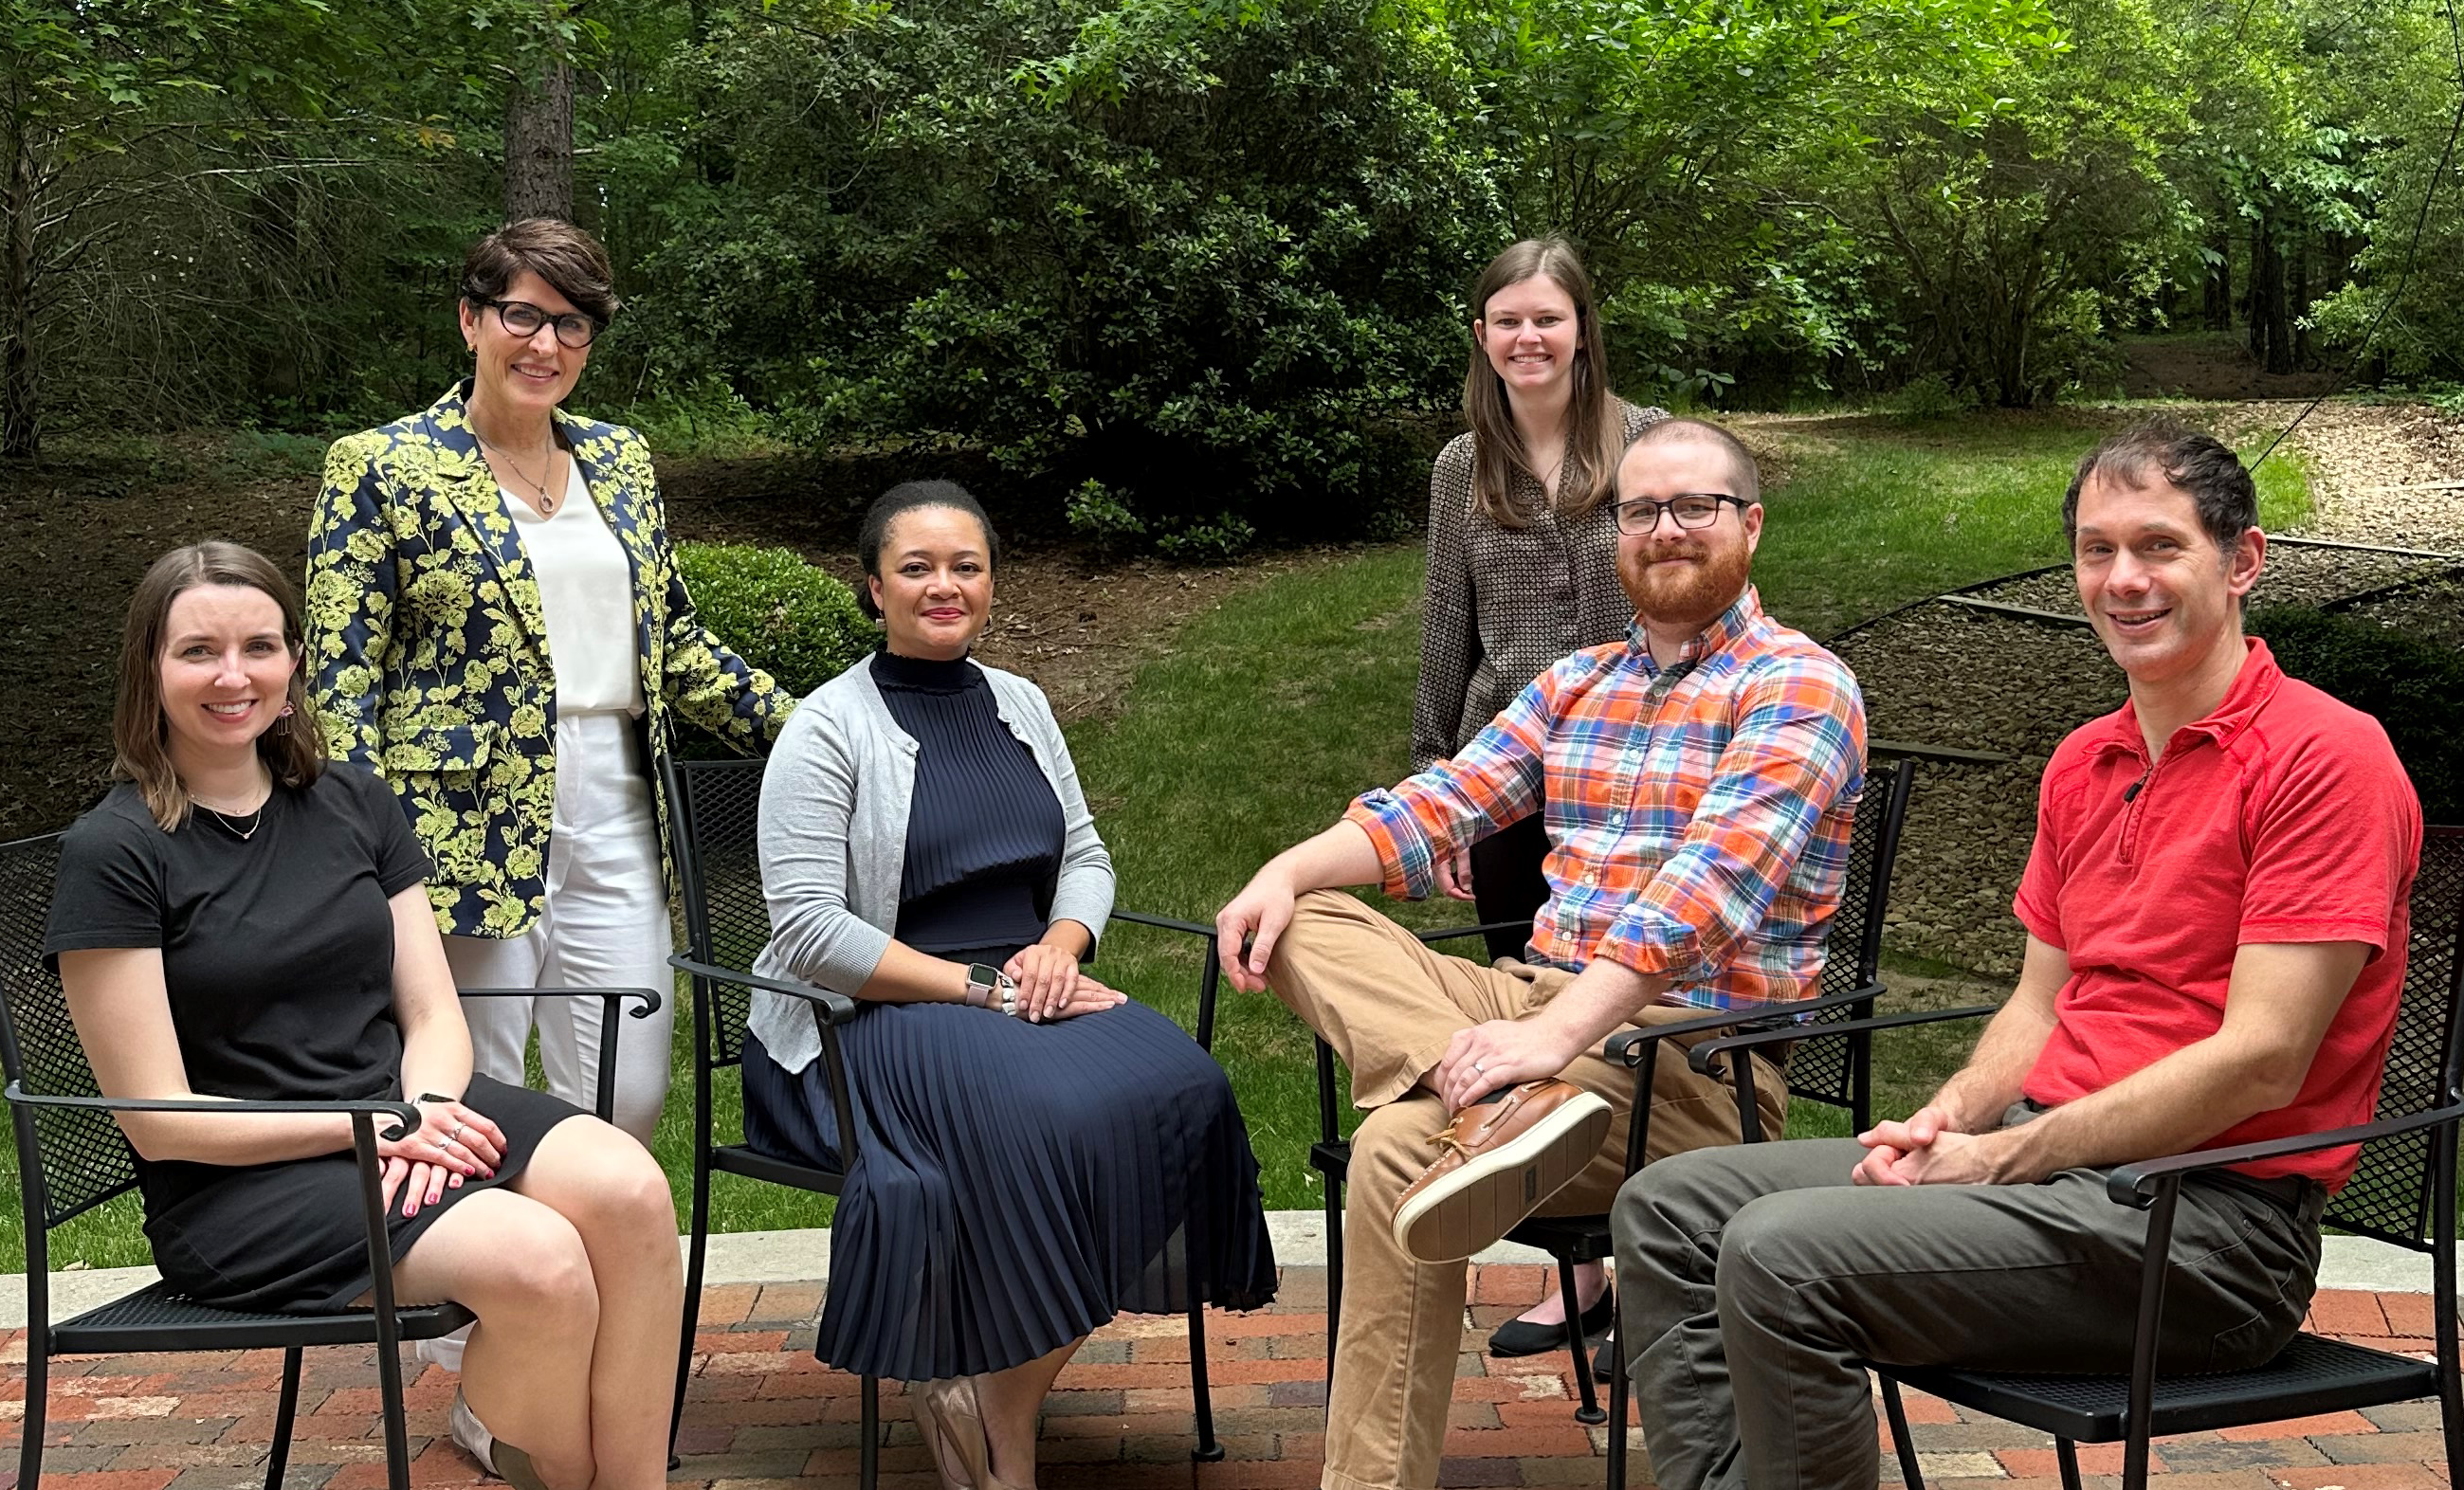 Six members of the Criminal Justice Innovation Lab team seated and standing in front of leafy trees and grass.